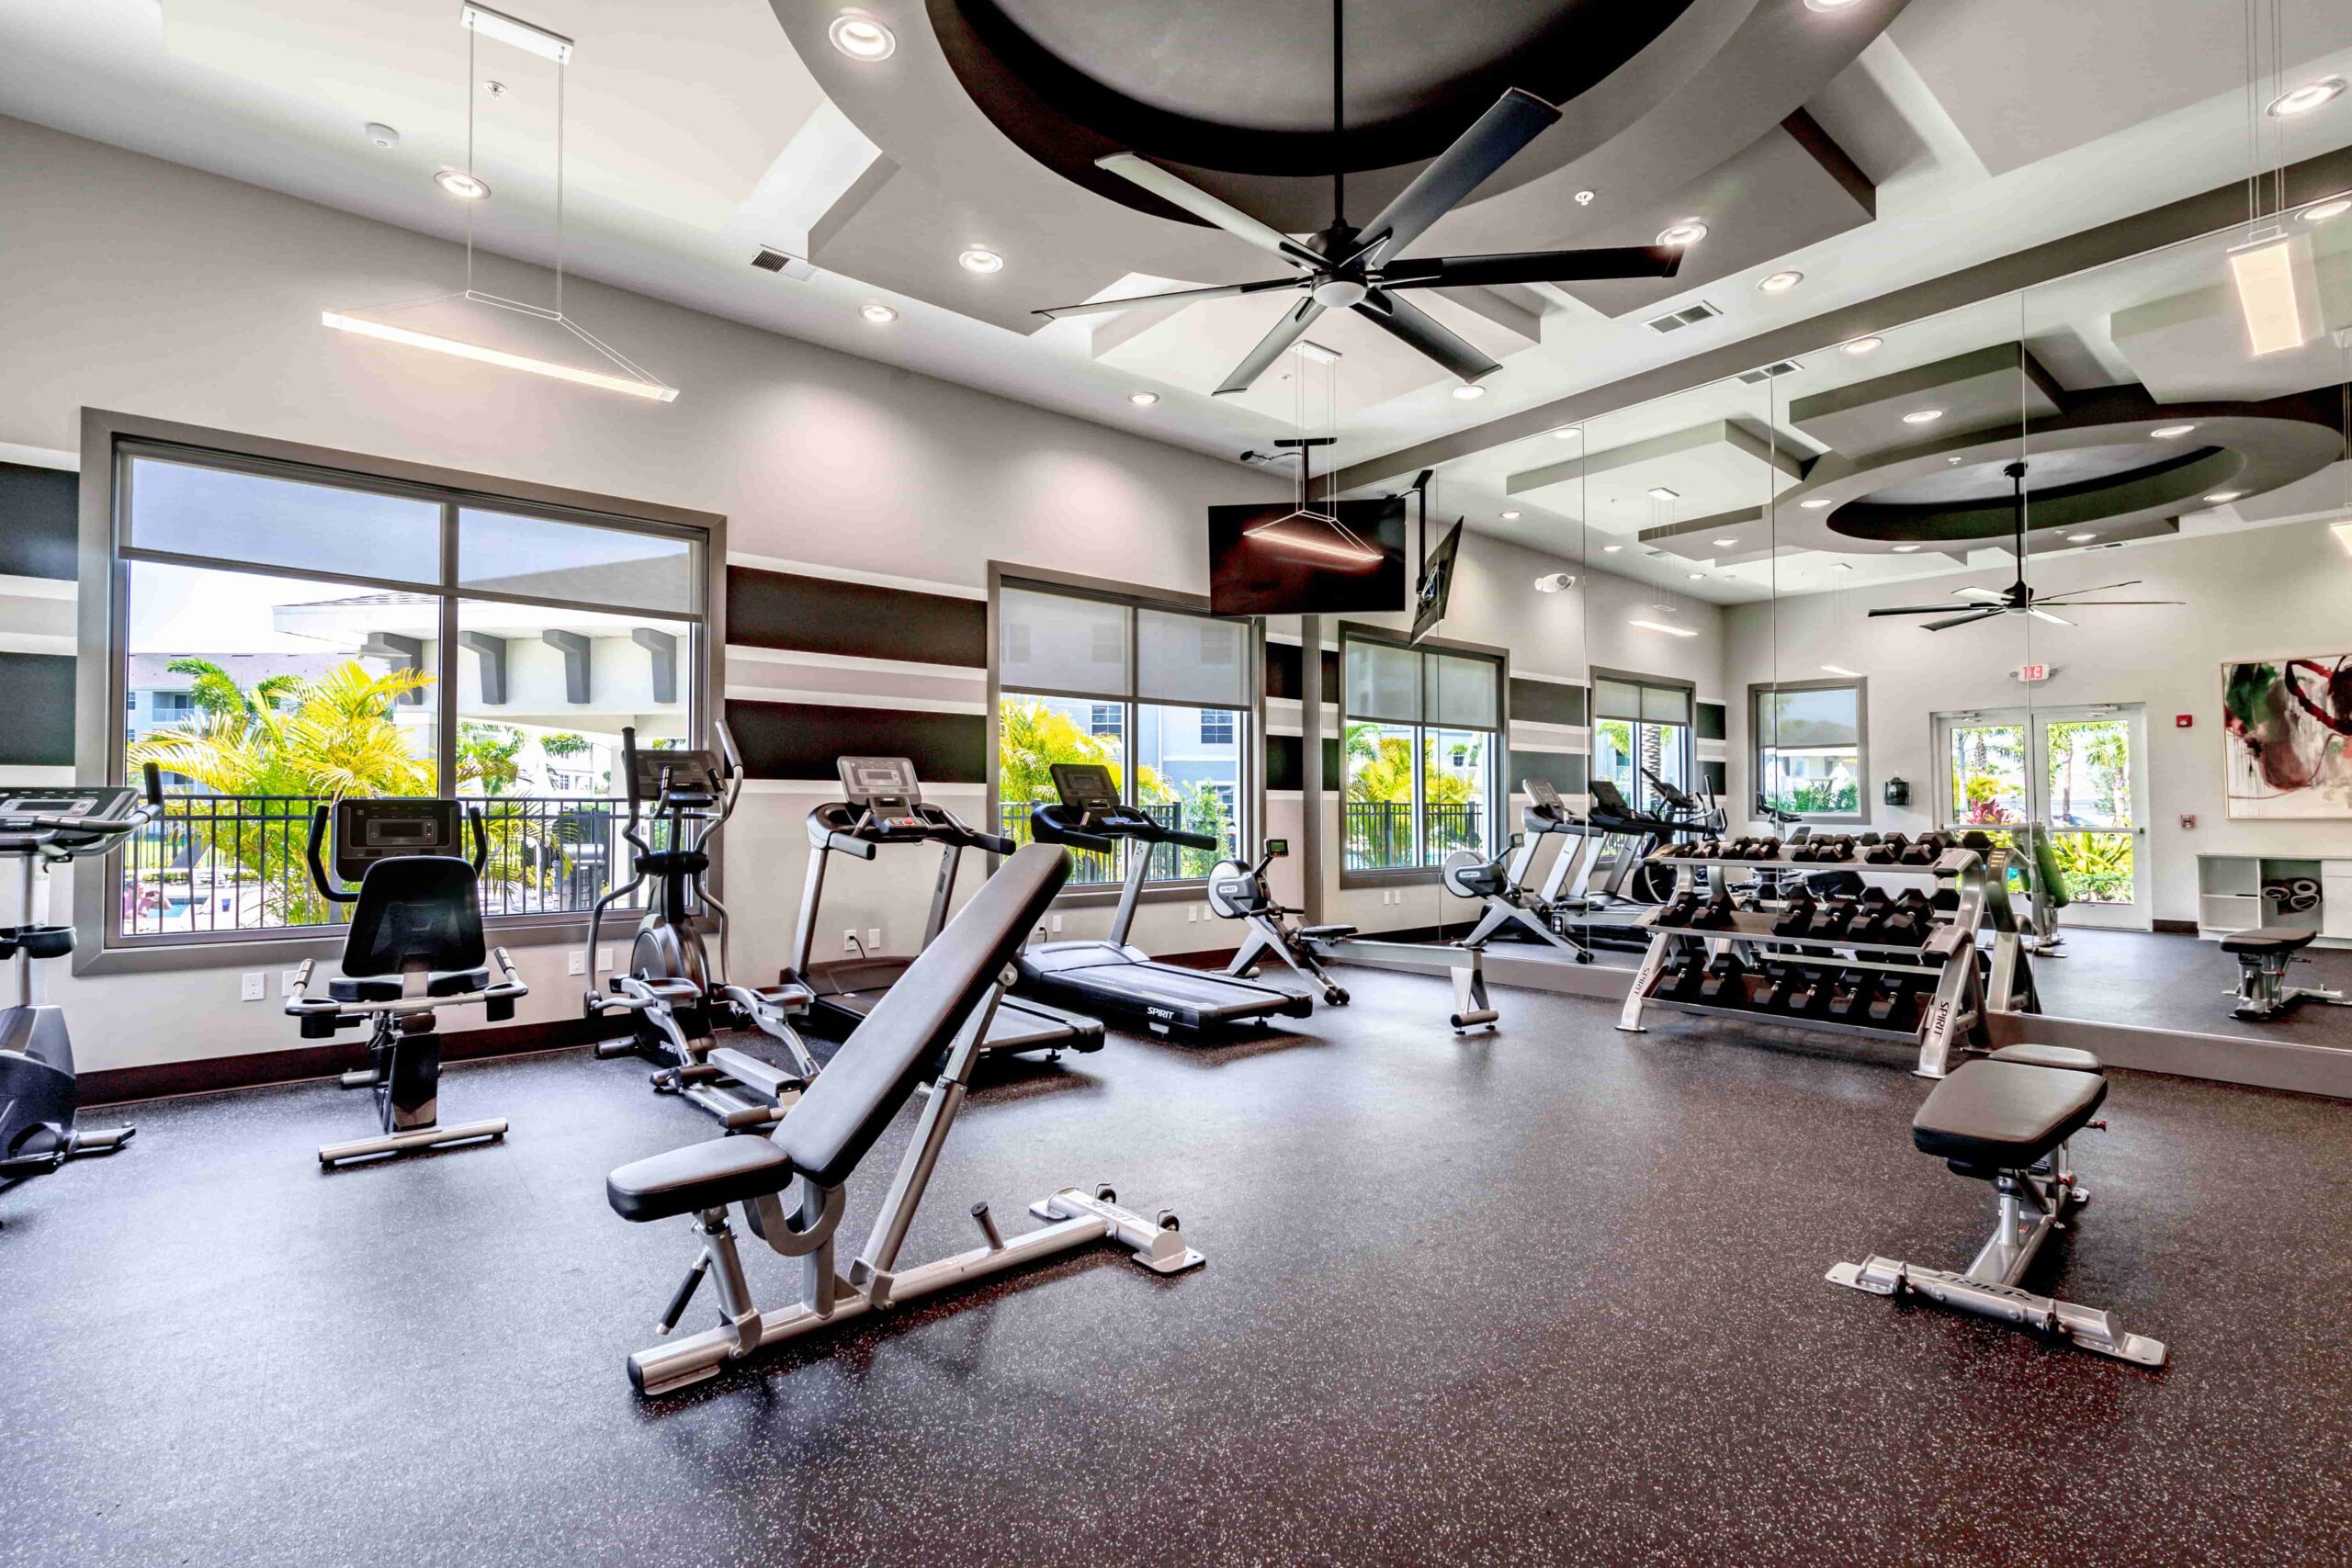 community fitness center with modern equipment and weights